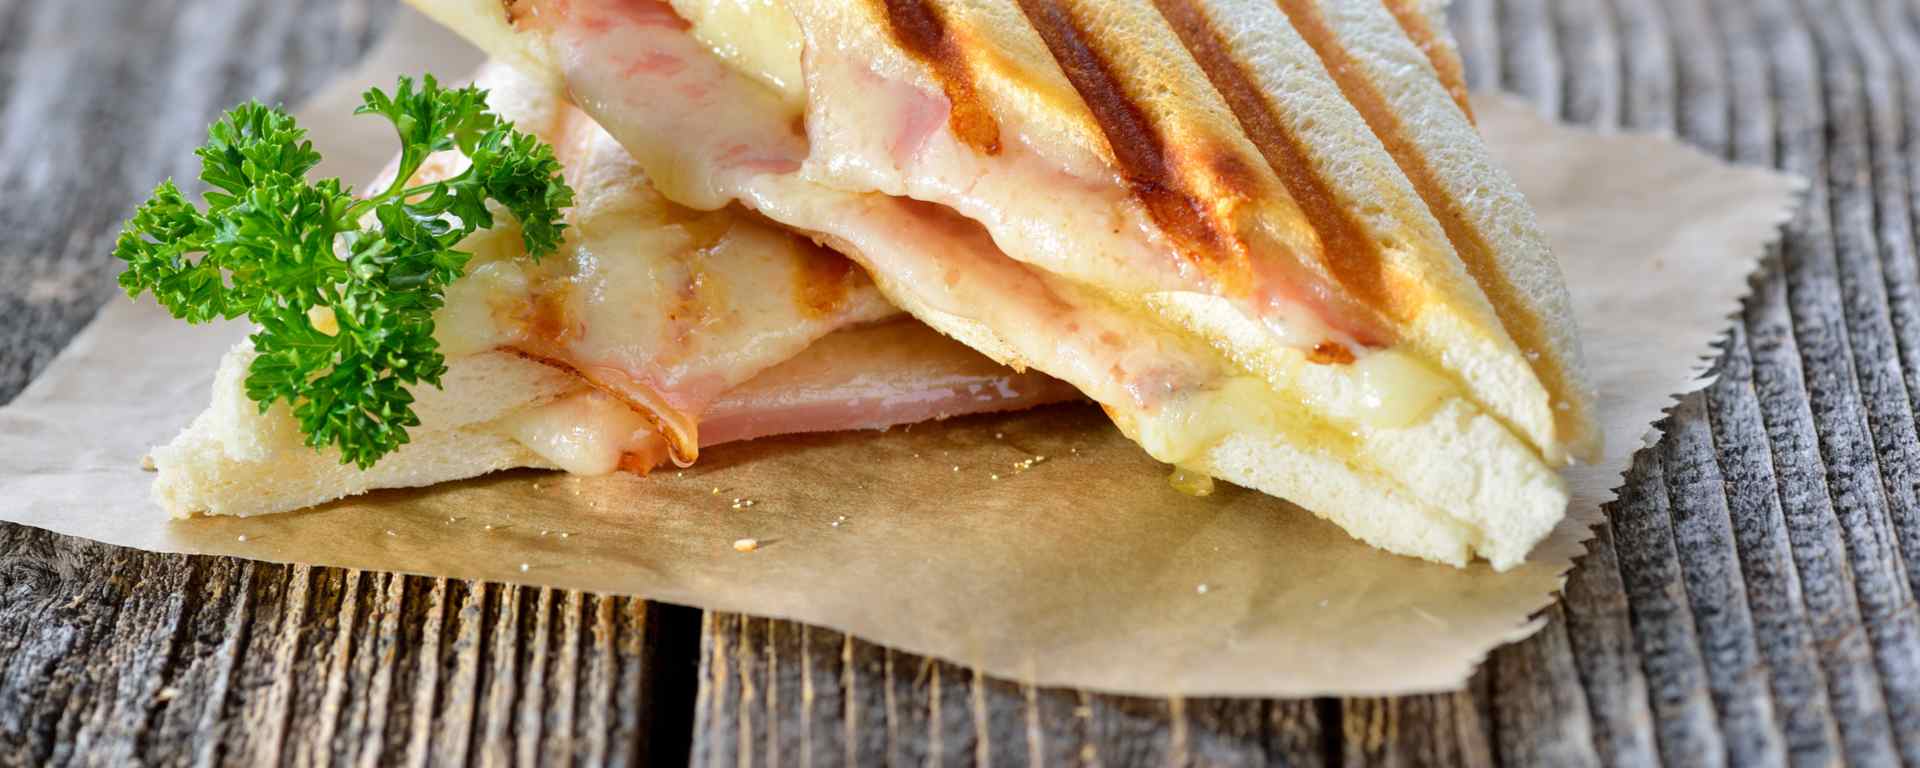 Photo for - Grilled Ham with Brie and Apple